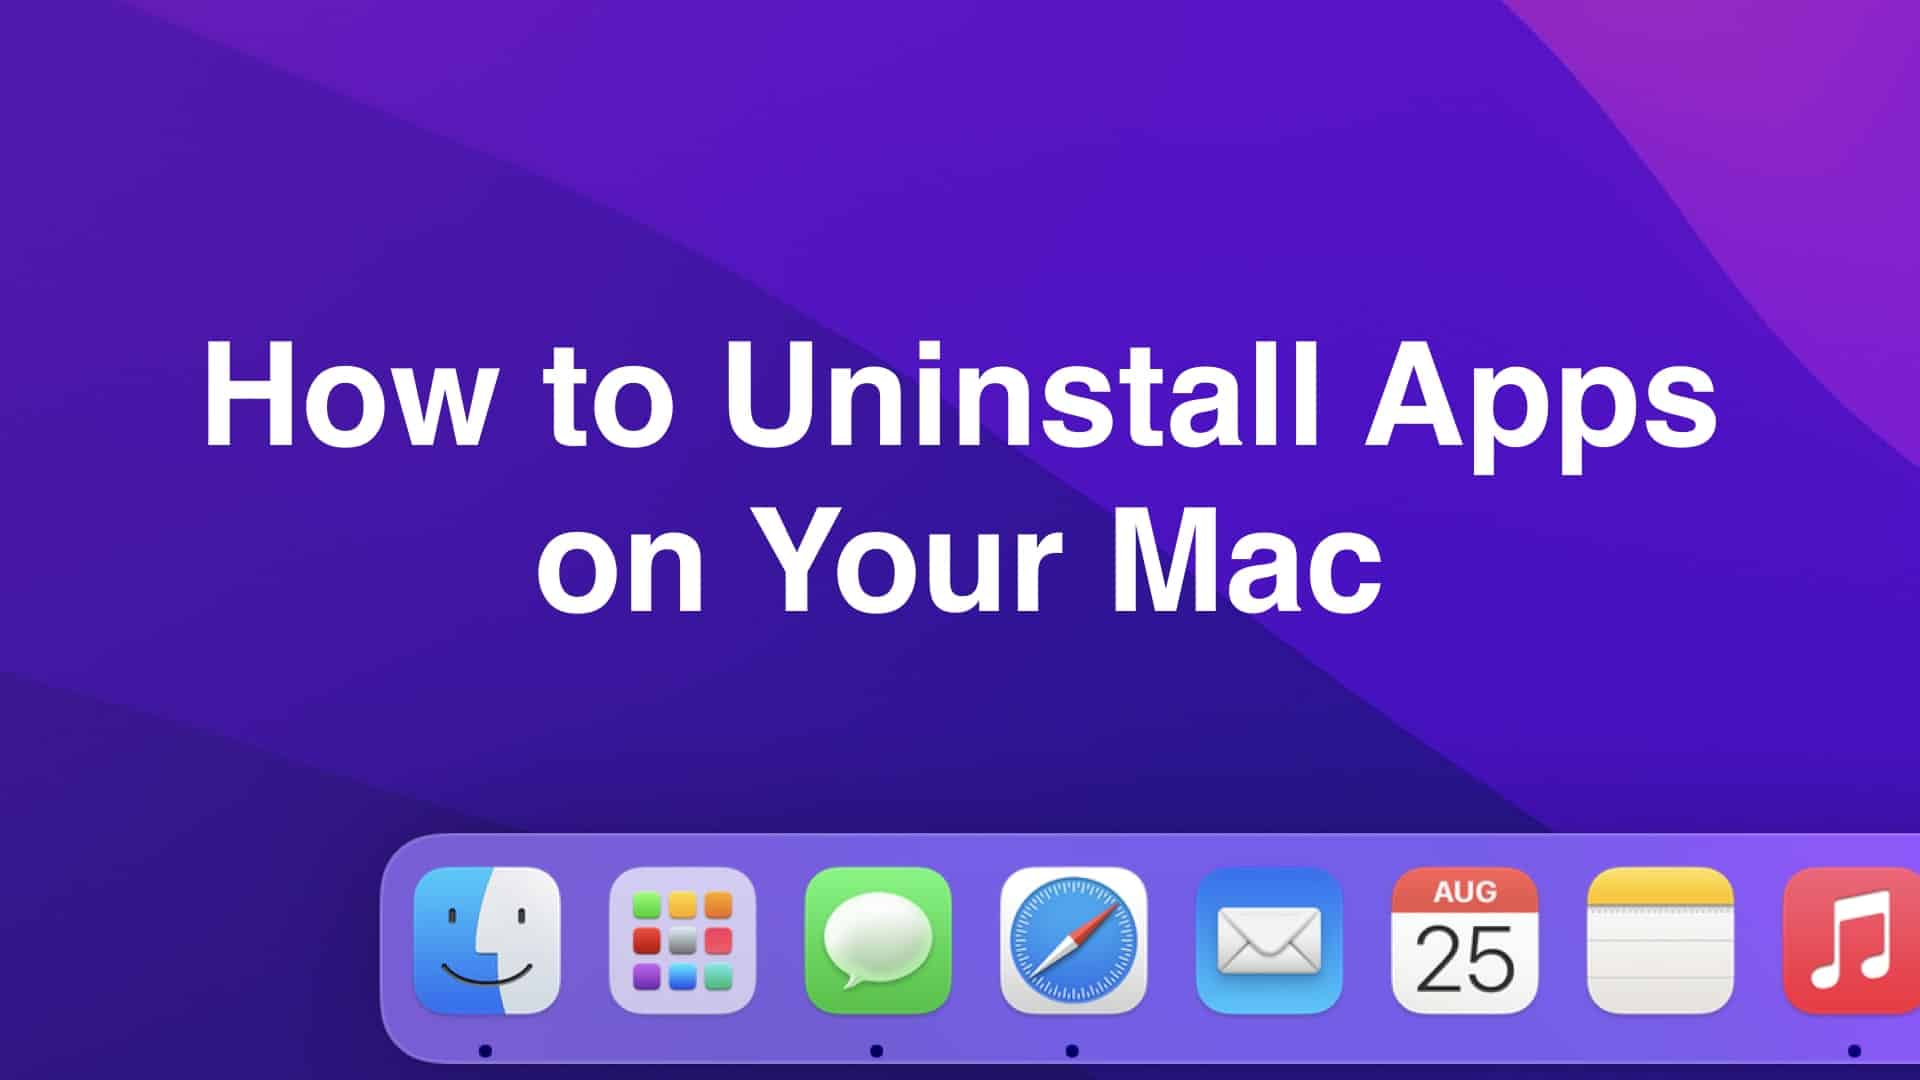 How to Uninstall Apps on macOS